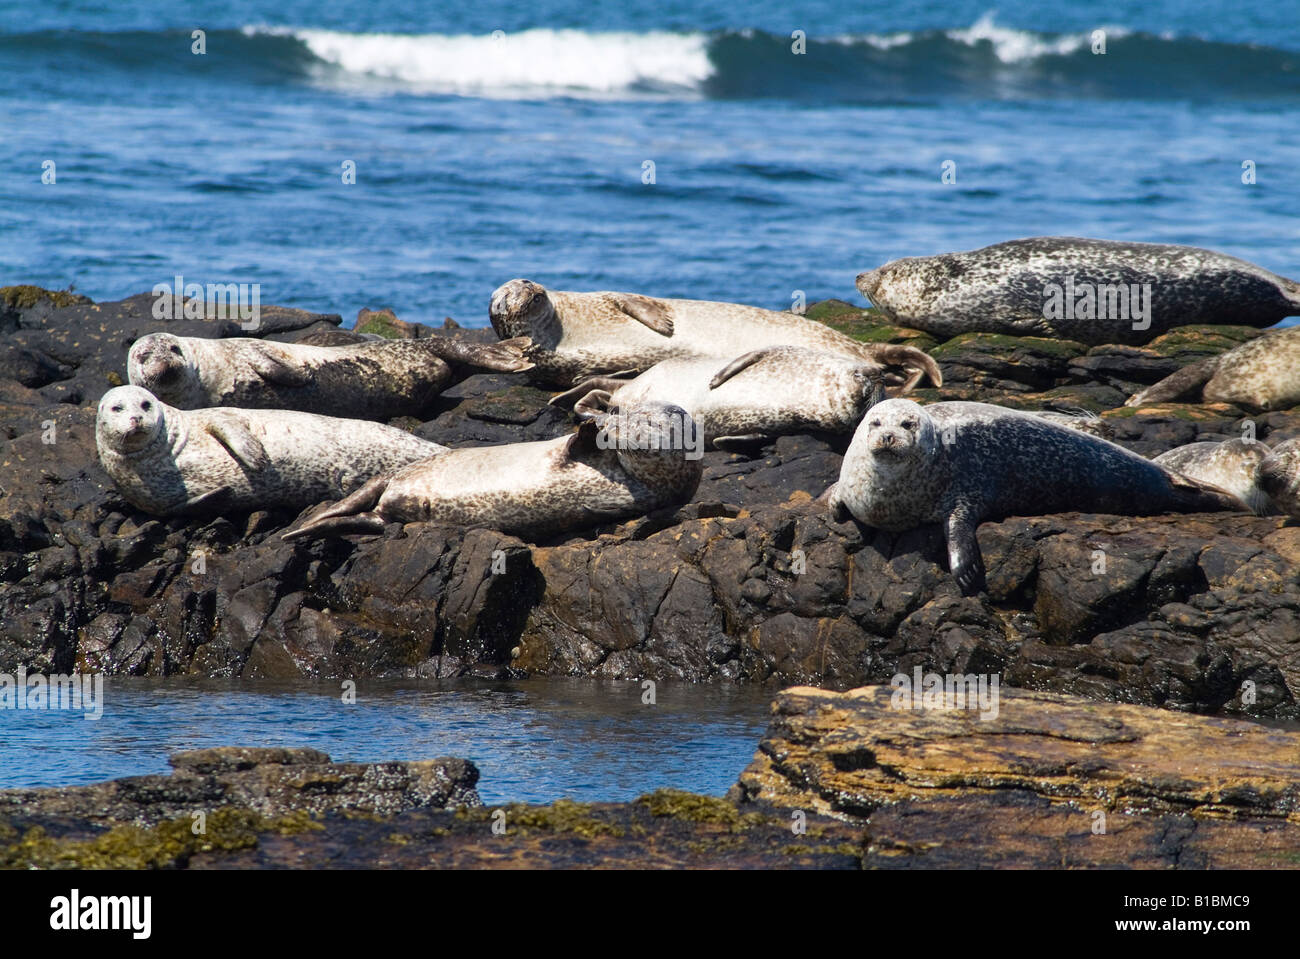 dh Common Seal Phoca vitulina SEAL UK Orkney harbor seals colony basking on rocky outcrop group scotland rocks lying Stock Photo